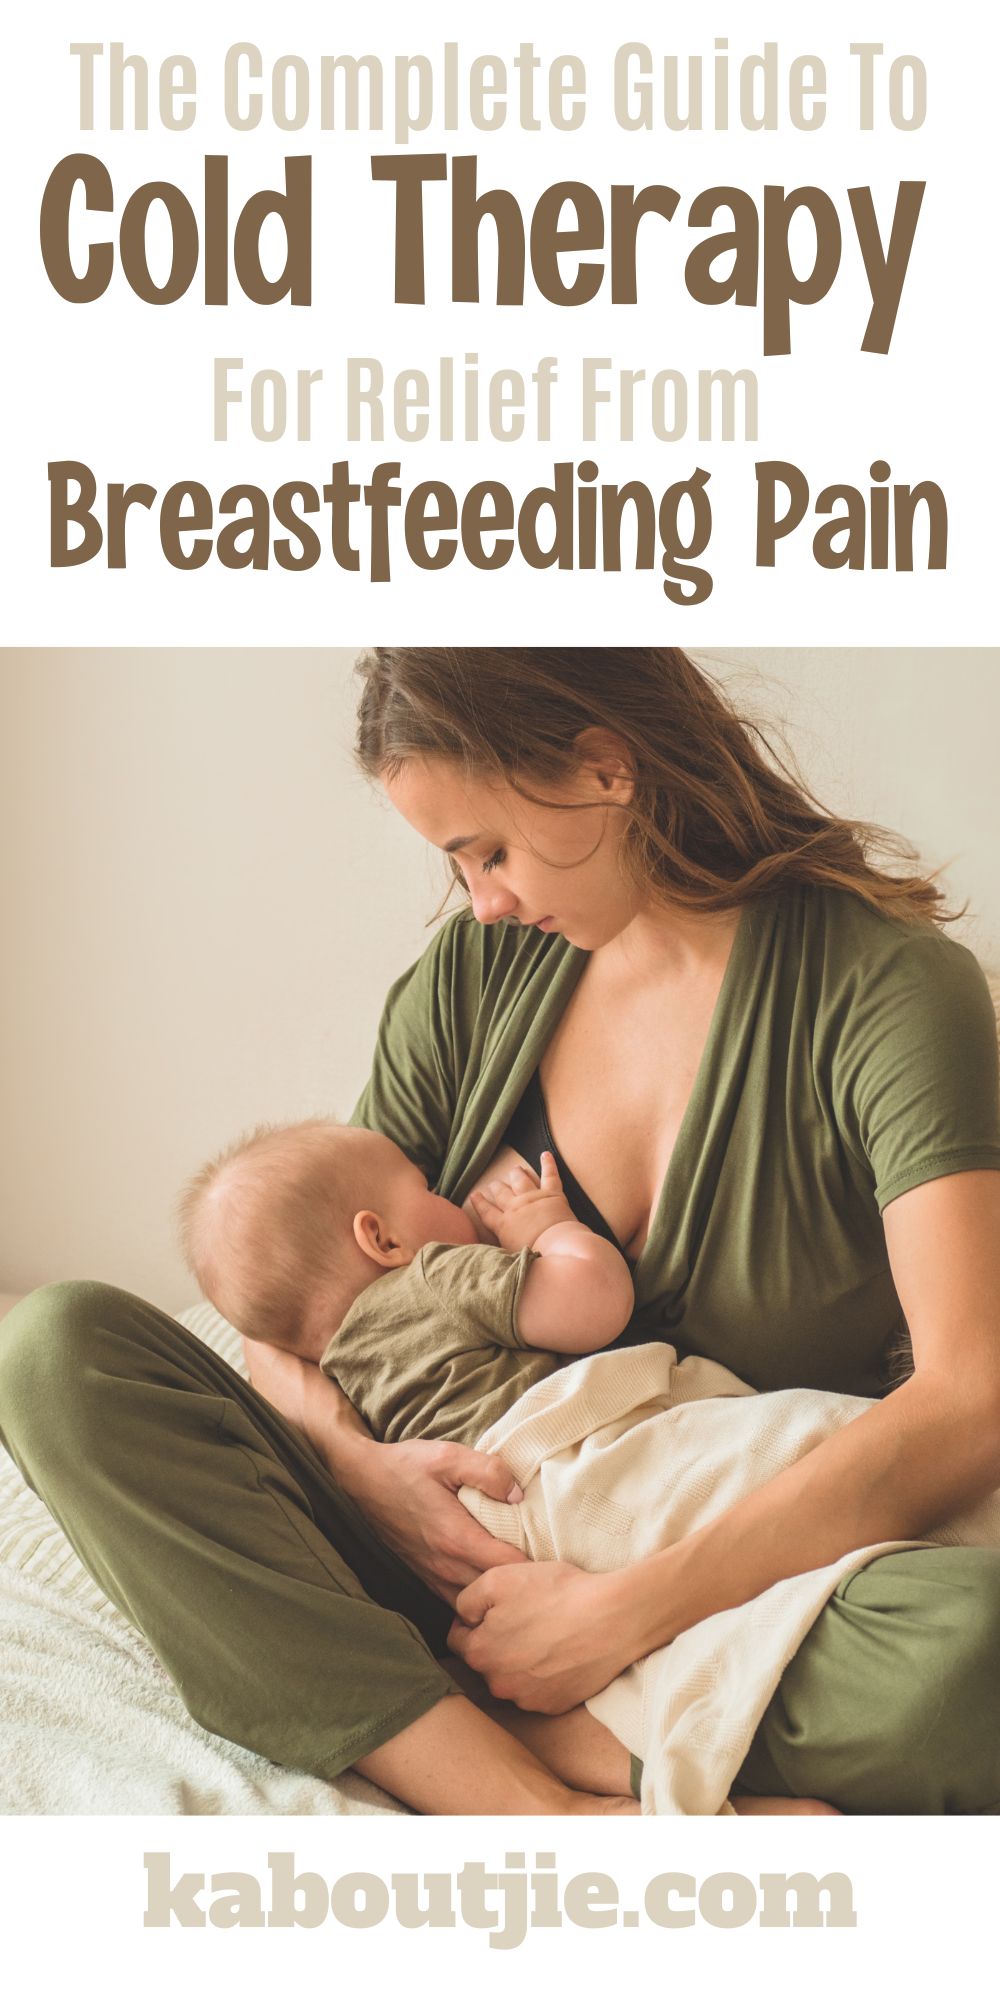 The Complete Guide To Cold Therapy For Relief From Breastfeeding Pain